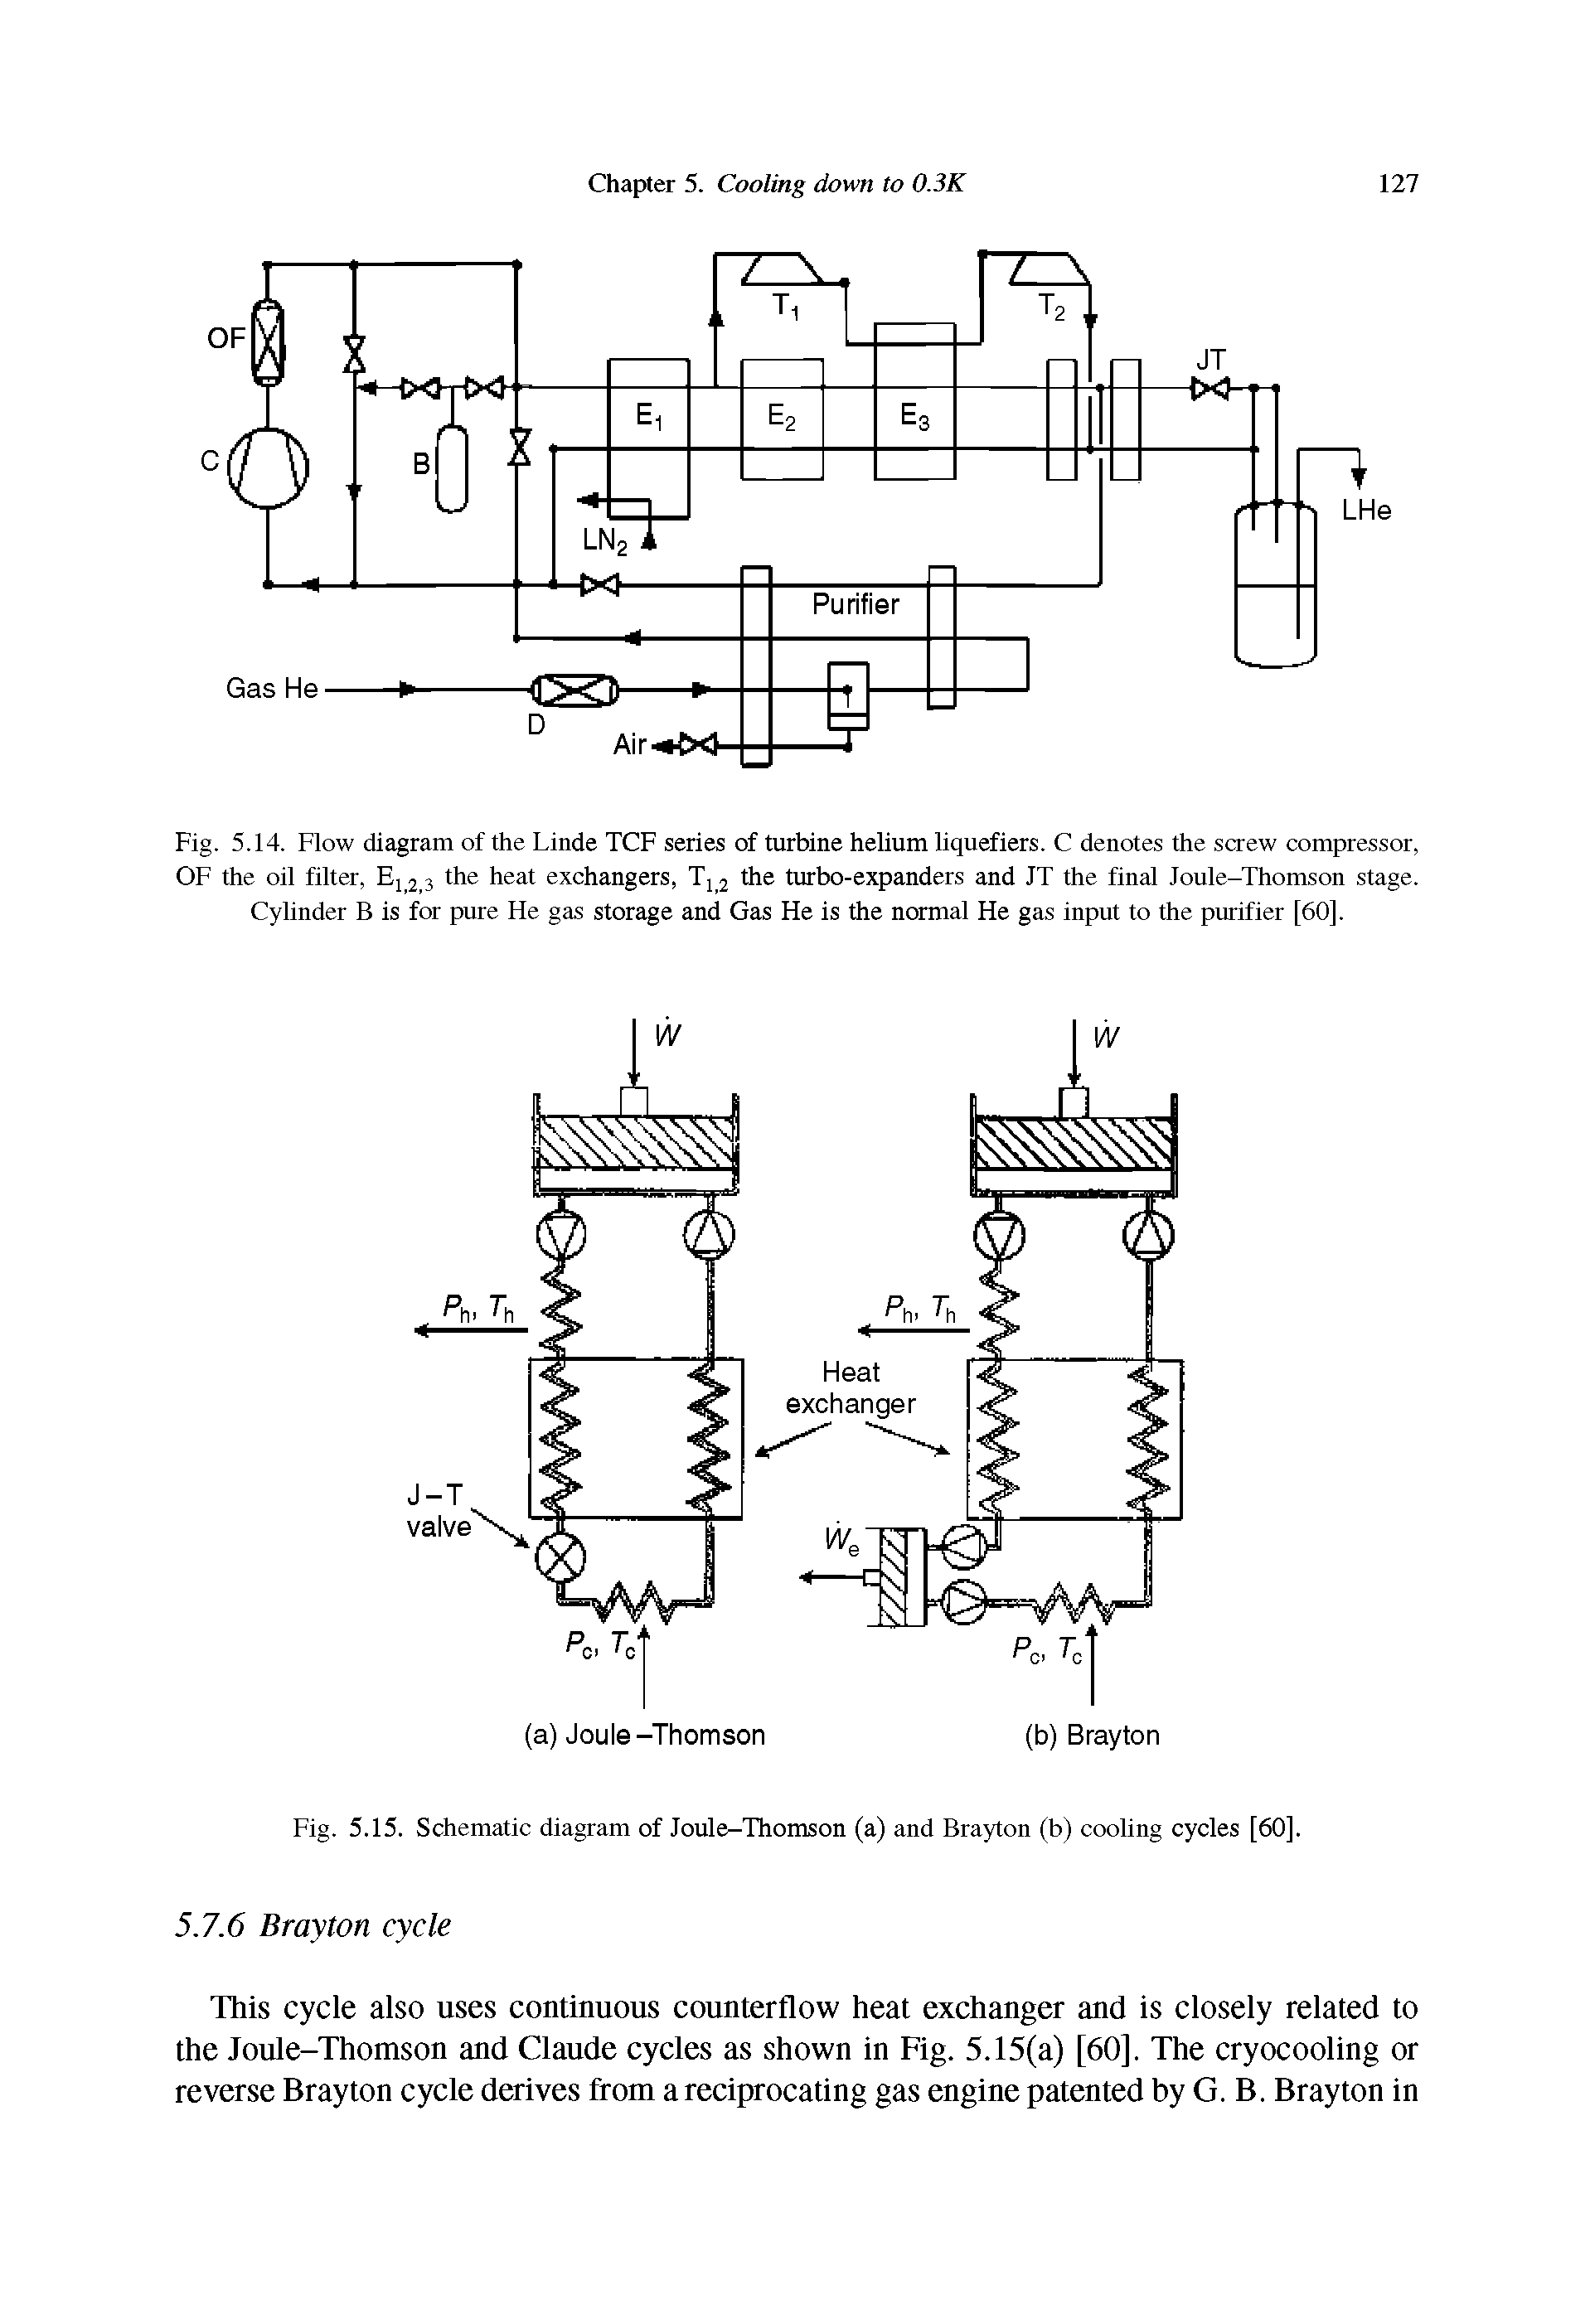 Fig. 5.14. Flow diagram of the Linde TCF series of turbine helium liquefiers. C denotes the screw compressor, OF the oil filter, Ej 2 3 the heat exchangers, T12 the turbo-expanders and JT the final Joule-Thomson stage. Cylinder B is for pure He gas storage and Gas He is the normal He gas input to the purifier [60],...